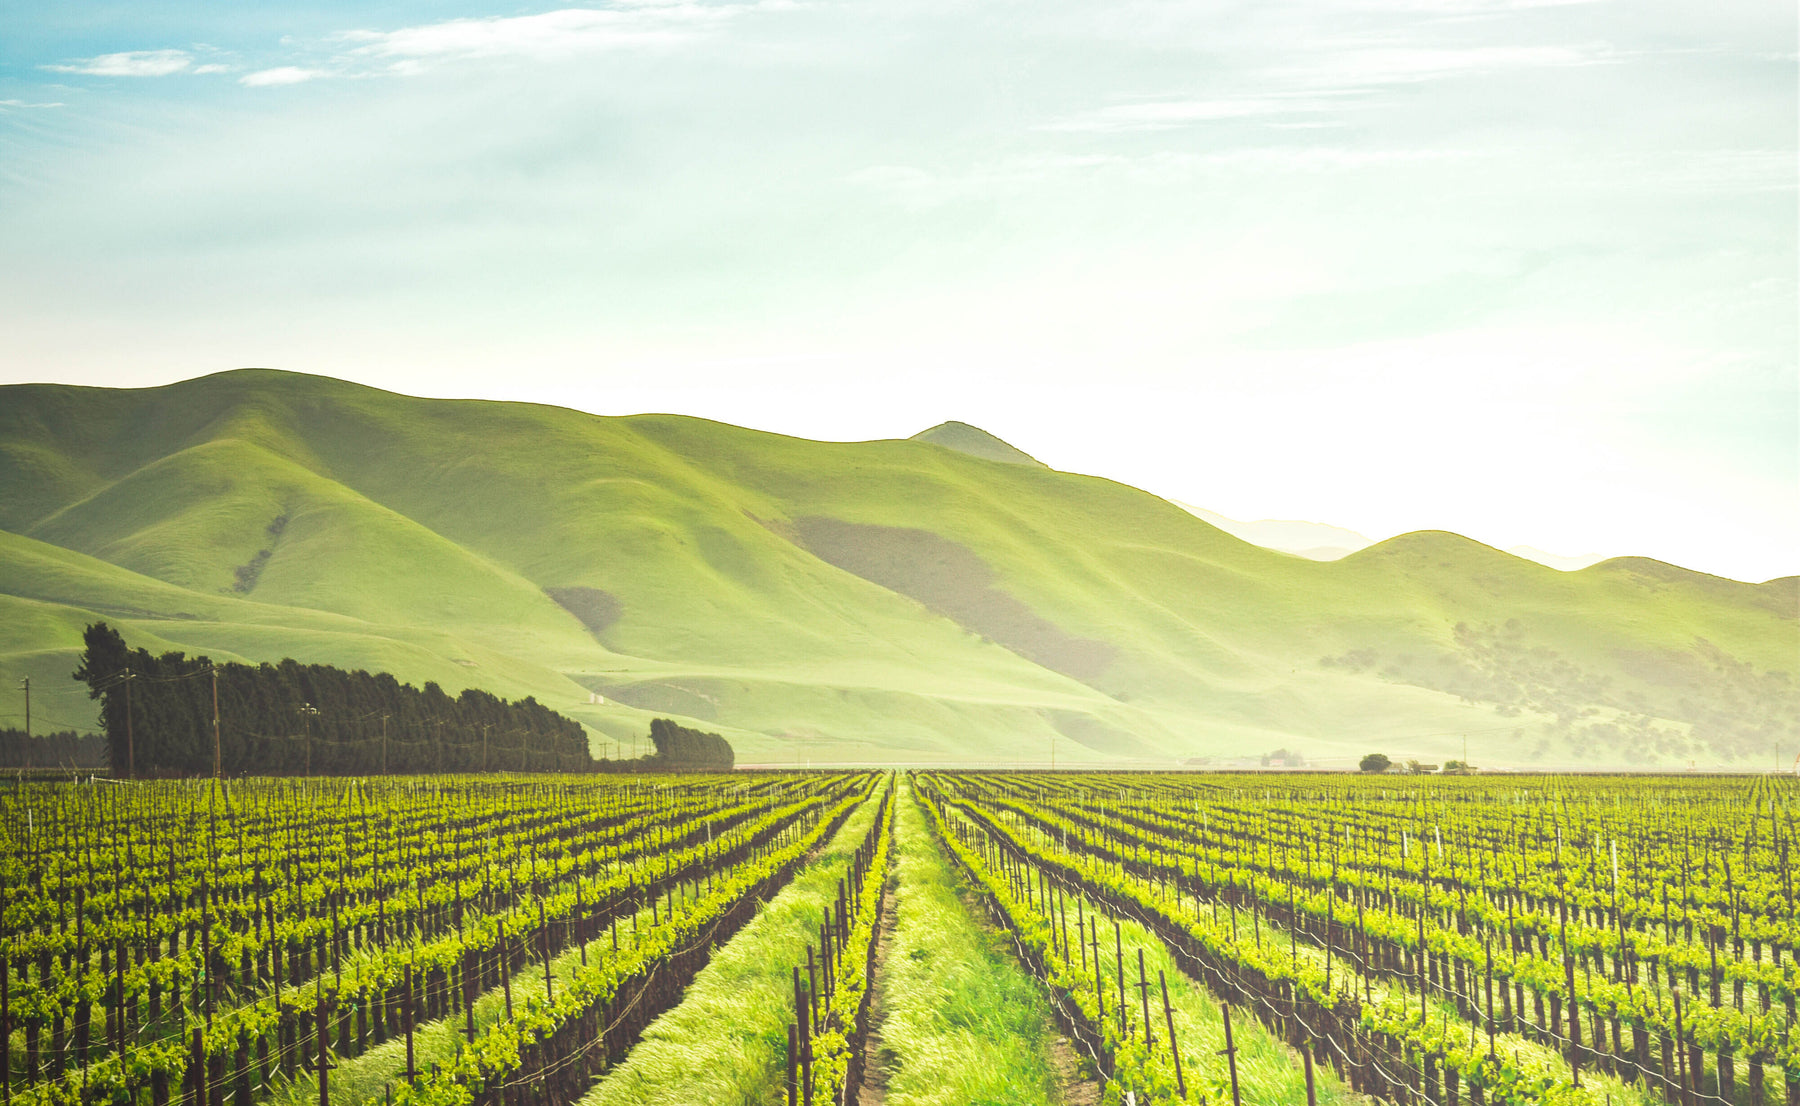 The mystical Martinborough region of New Zealand famous for it's wine, green rolling hills are abundant and the land vast.